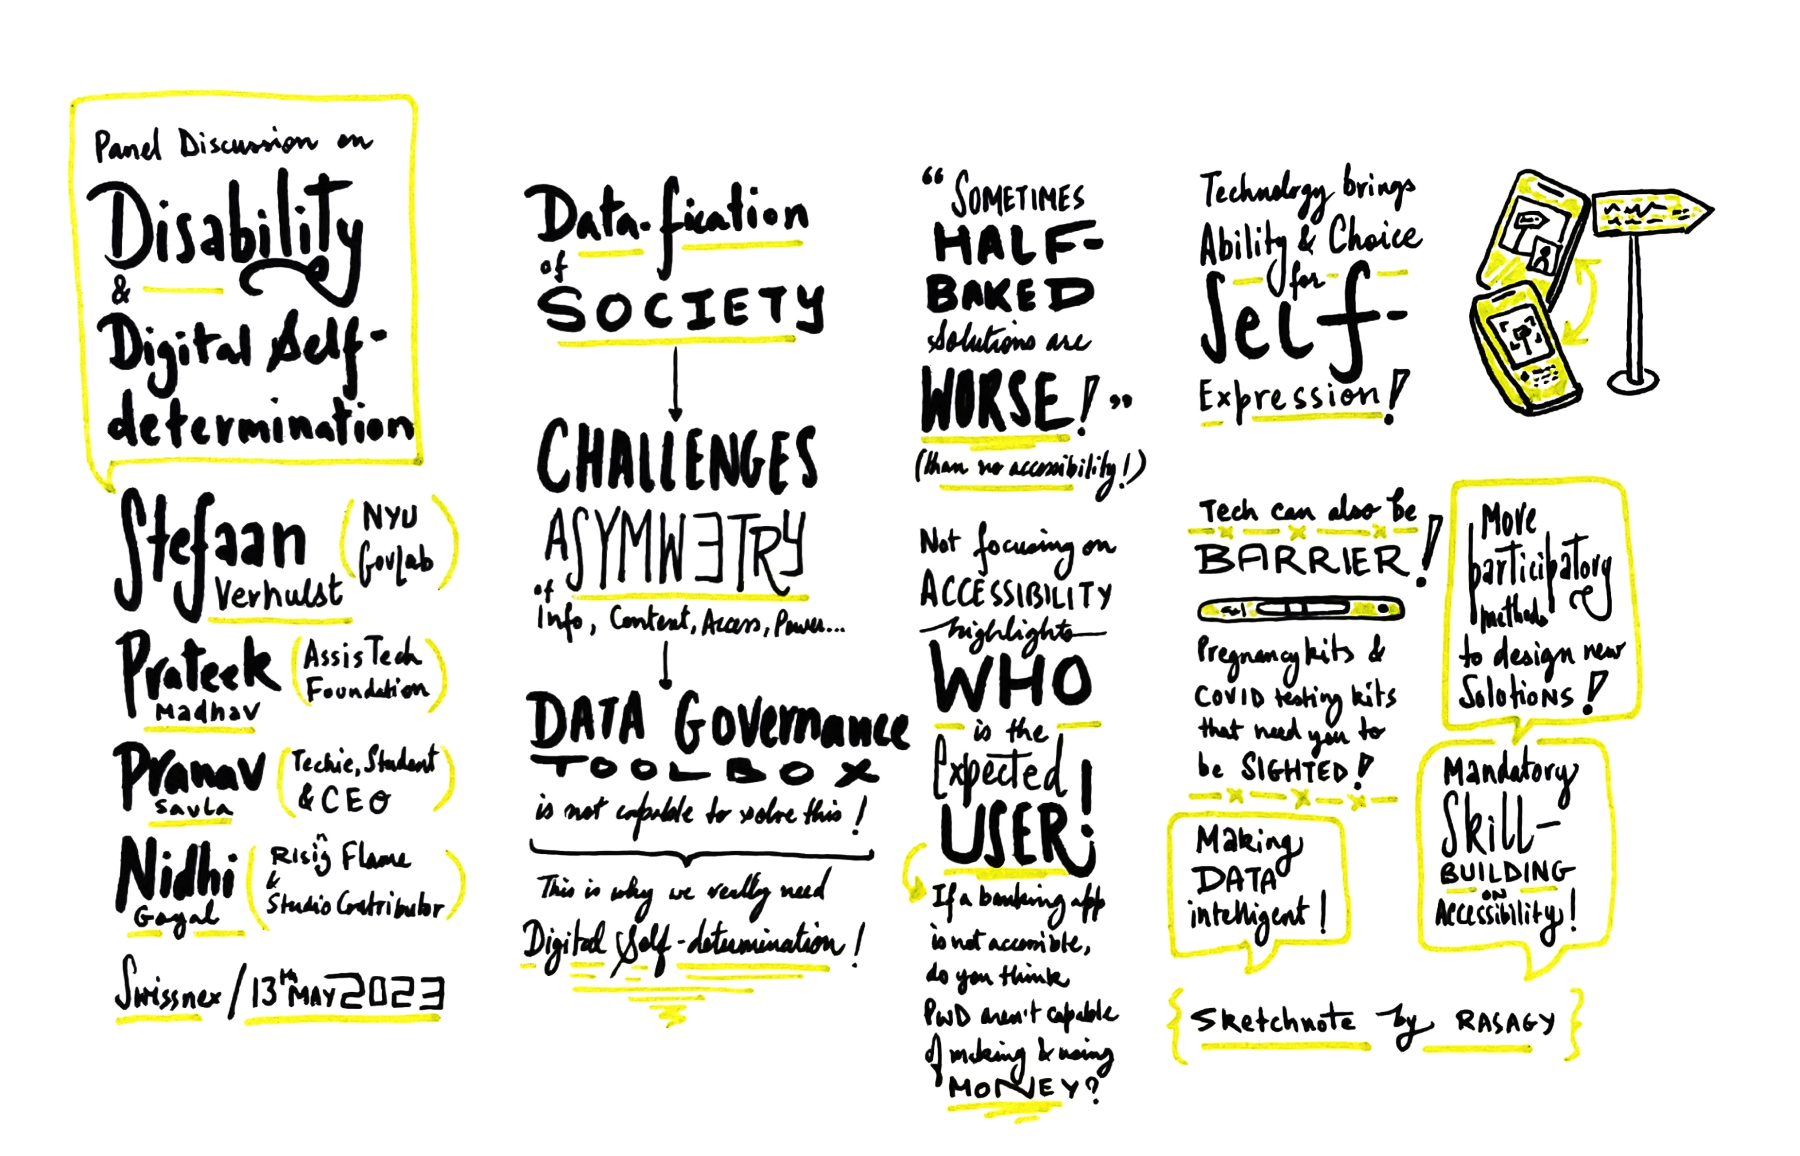 Sketchnote of final panel discussion on topics such as challenges of asymmetry, tech being enabler & barrier, and call for more participatory methods.